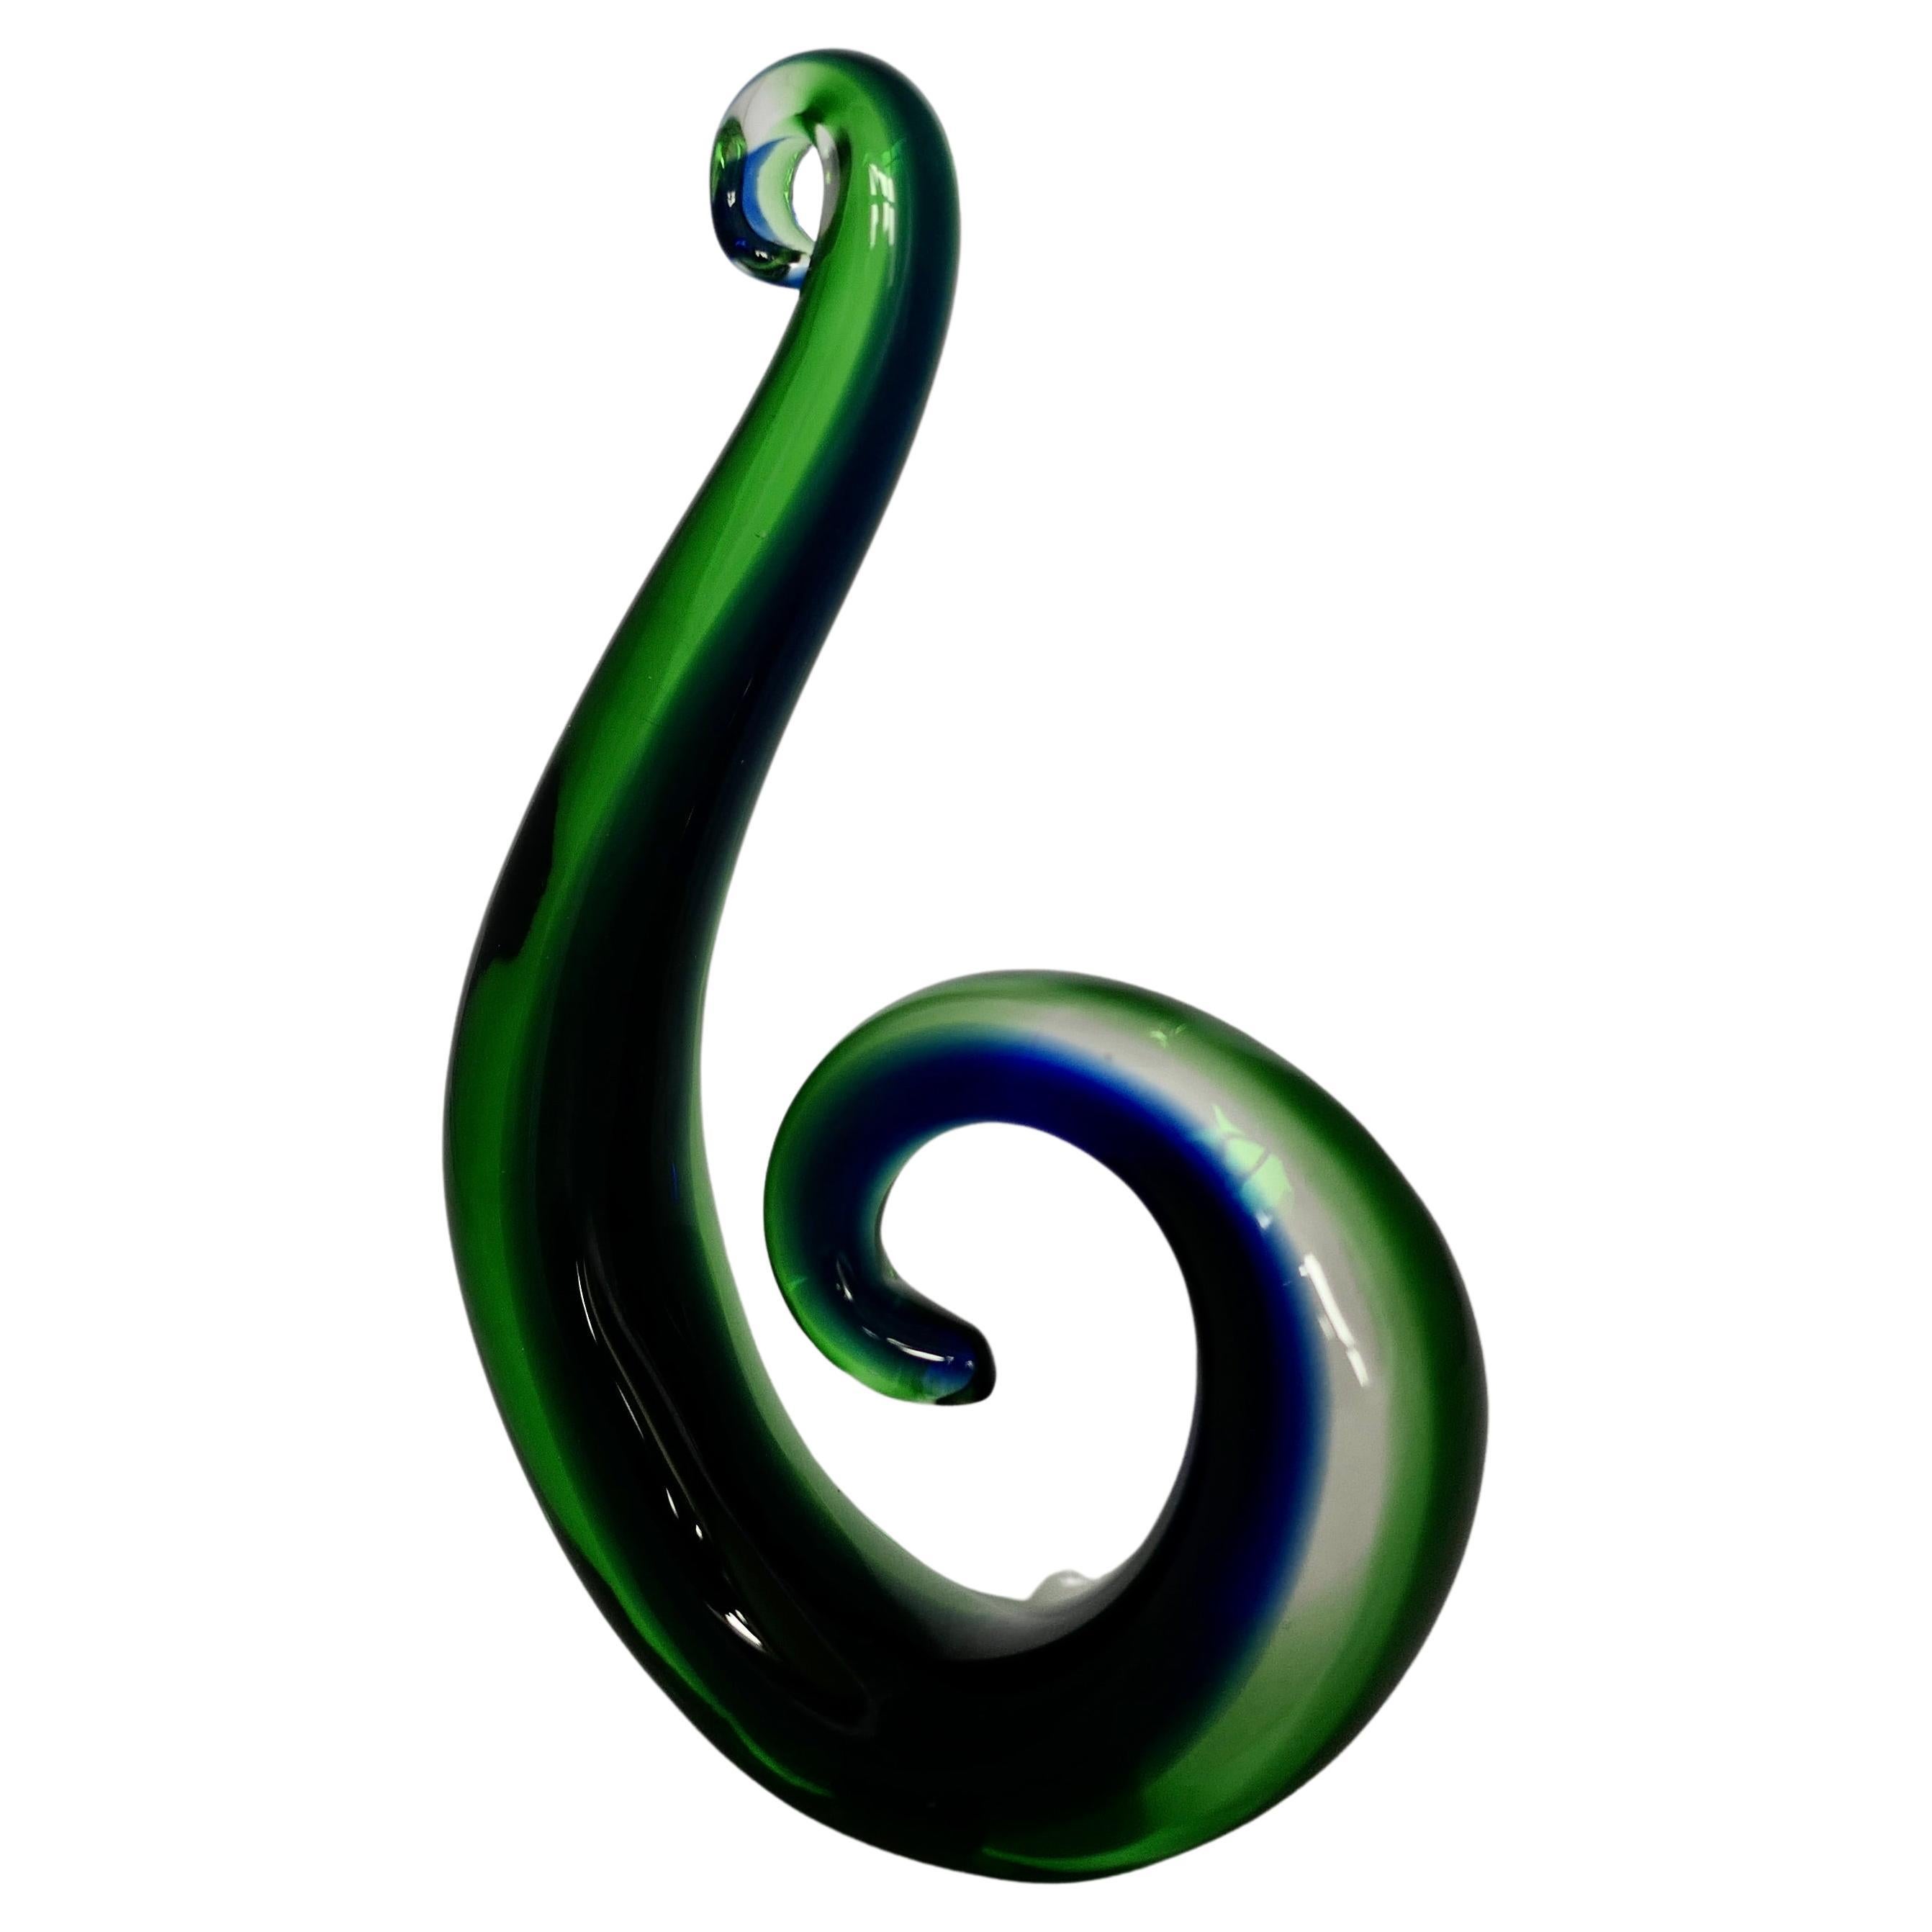 Vintage Murano Hand Crafted Green and Blue Koru  Representing a Fern Frond   For Sale